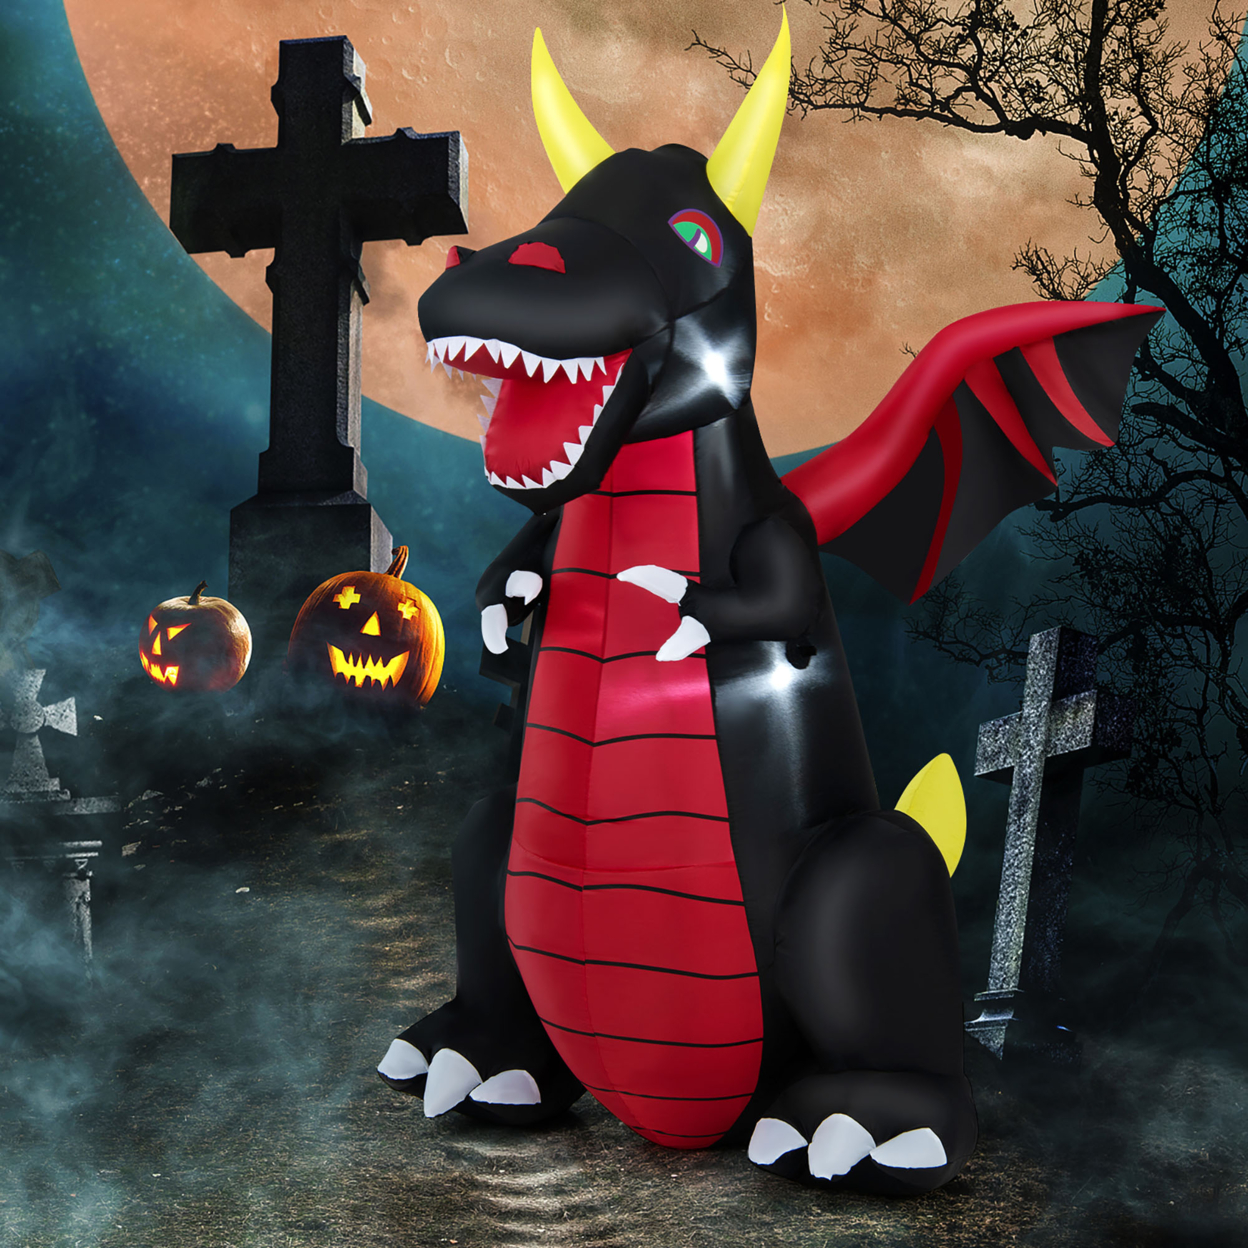 8FT Halloween Outdoor Blow Up Giant Dragon Holiday Decor W/ Wings & LED Lights